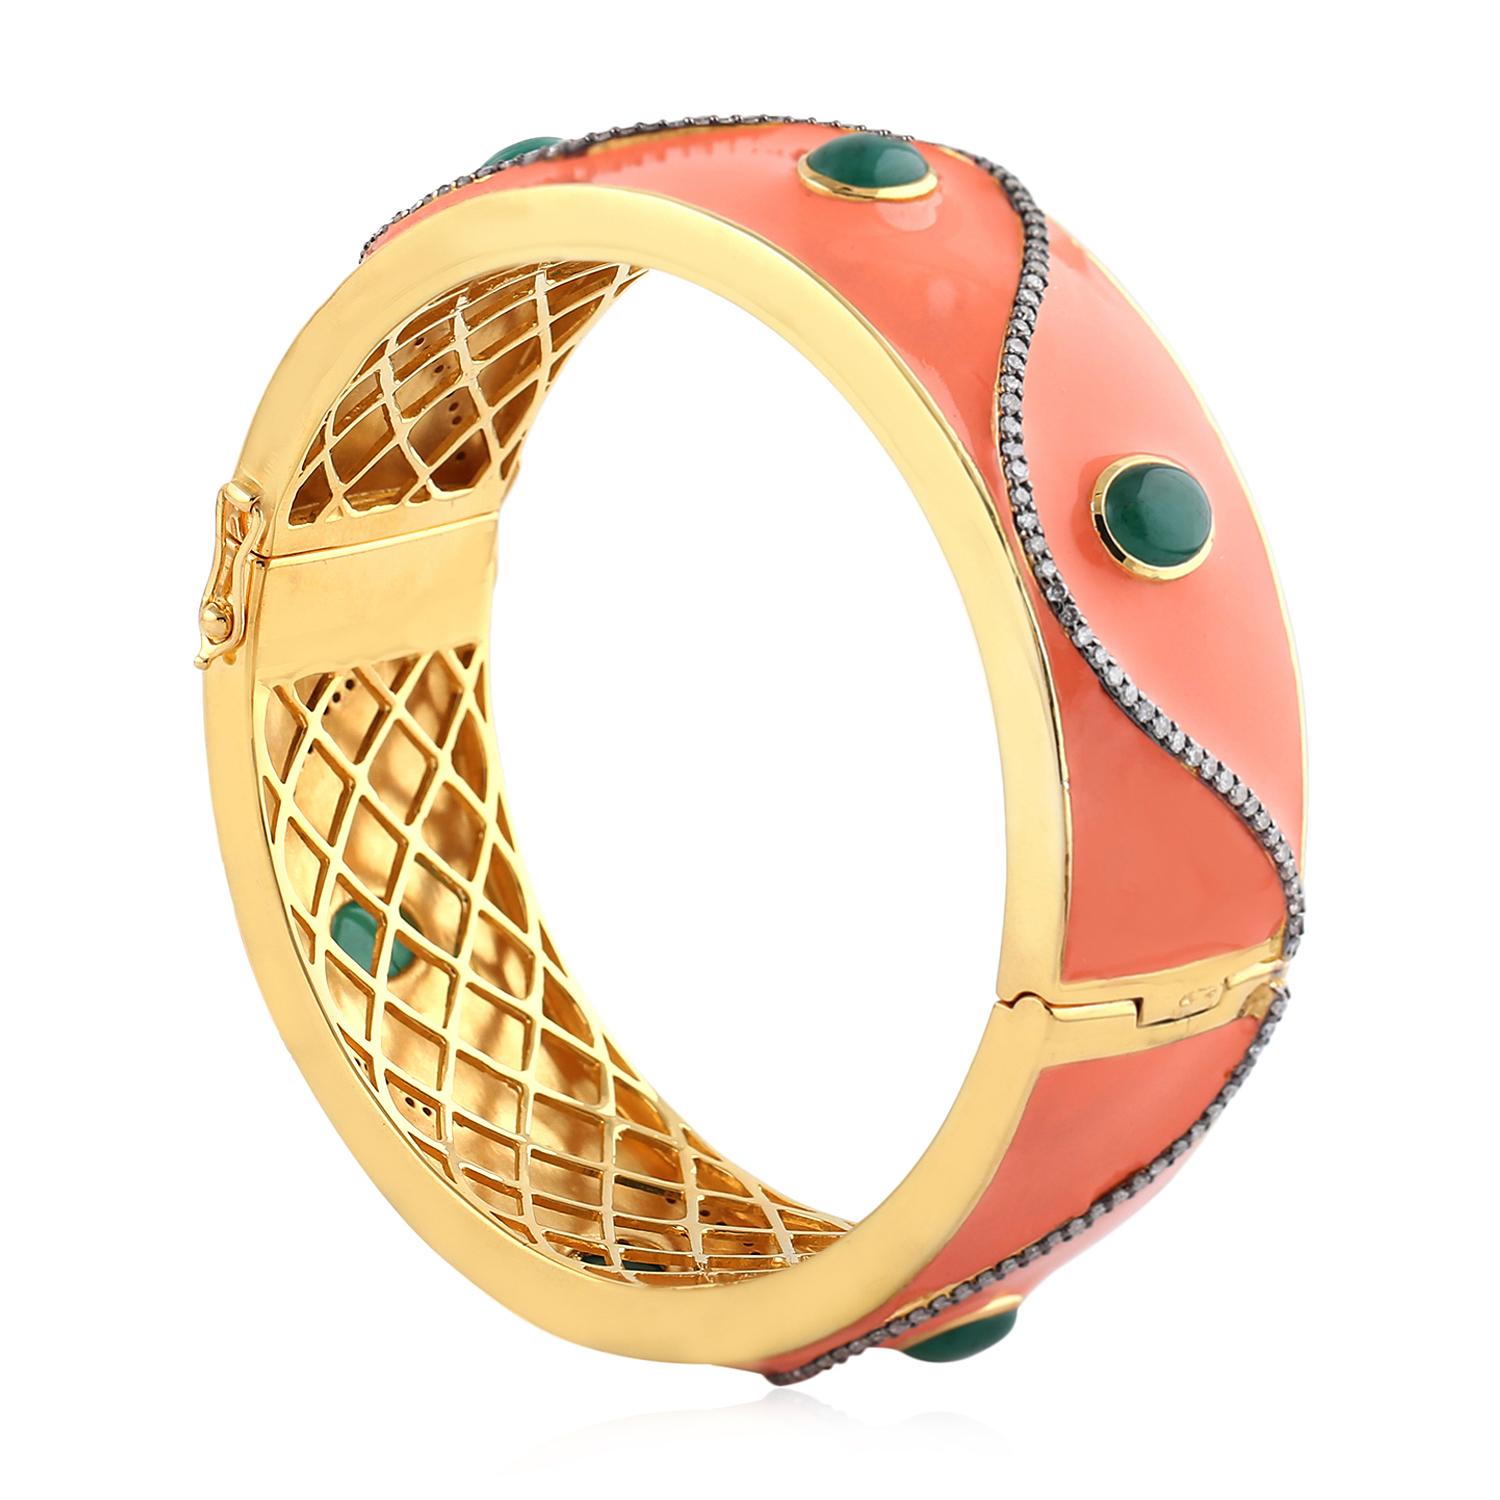 Art Nouveau Oval Shaped Emerald Stones On Coral Enameled Bangle Made In 18k Yellow Gold For Sale